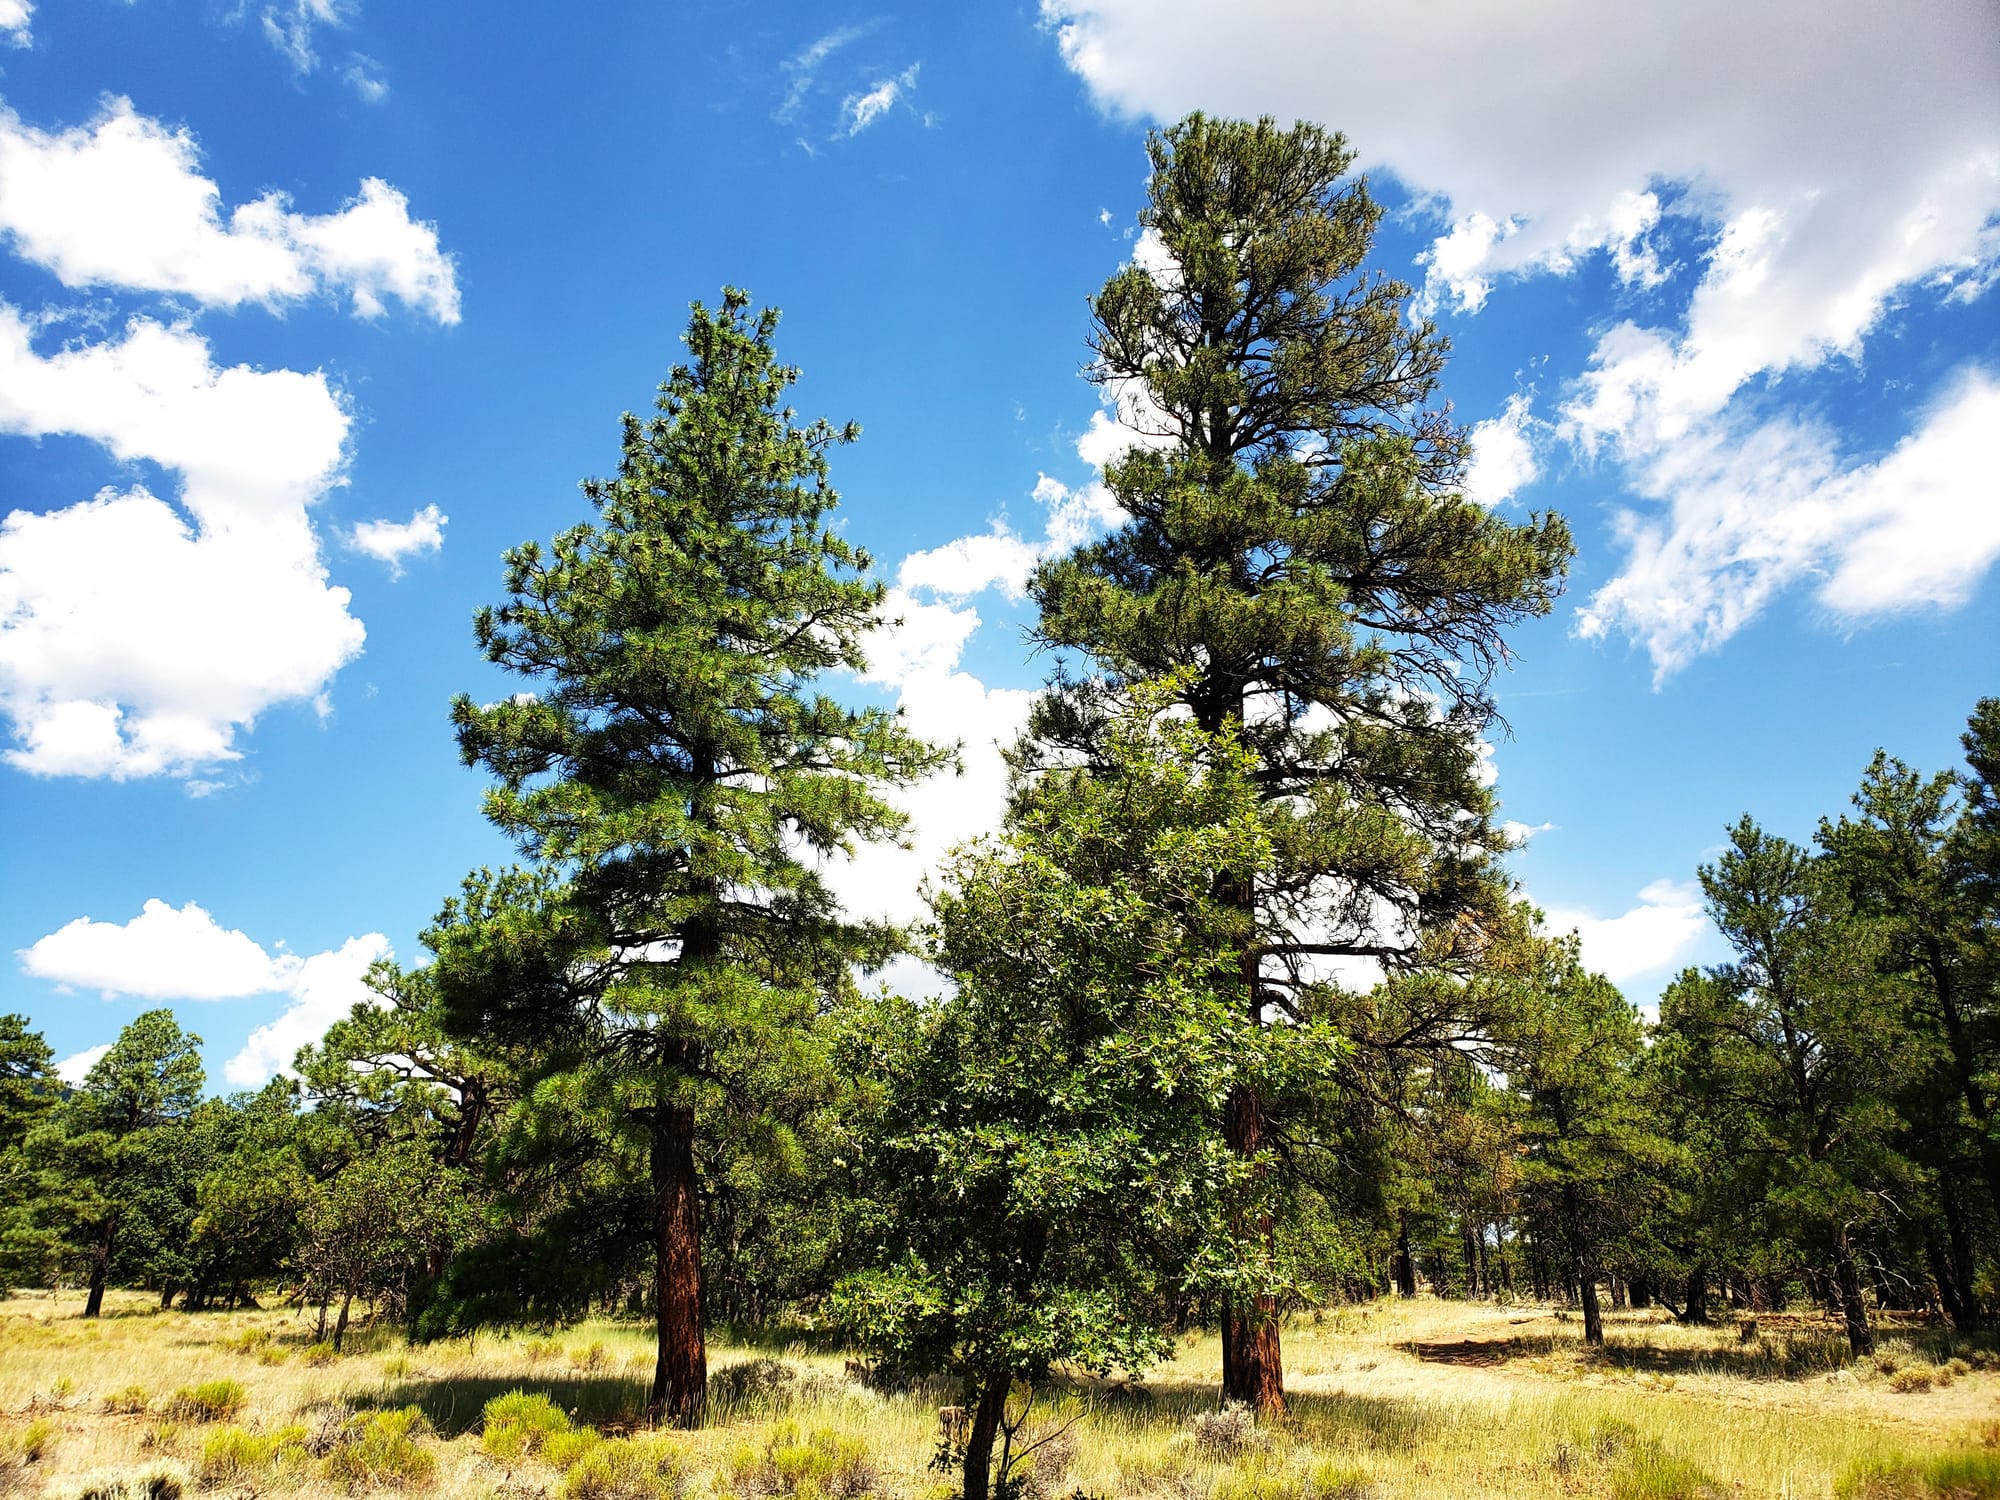 Travel Digressions: The Coconino National Forest and the Beauty of Memorials